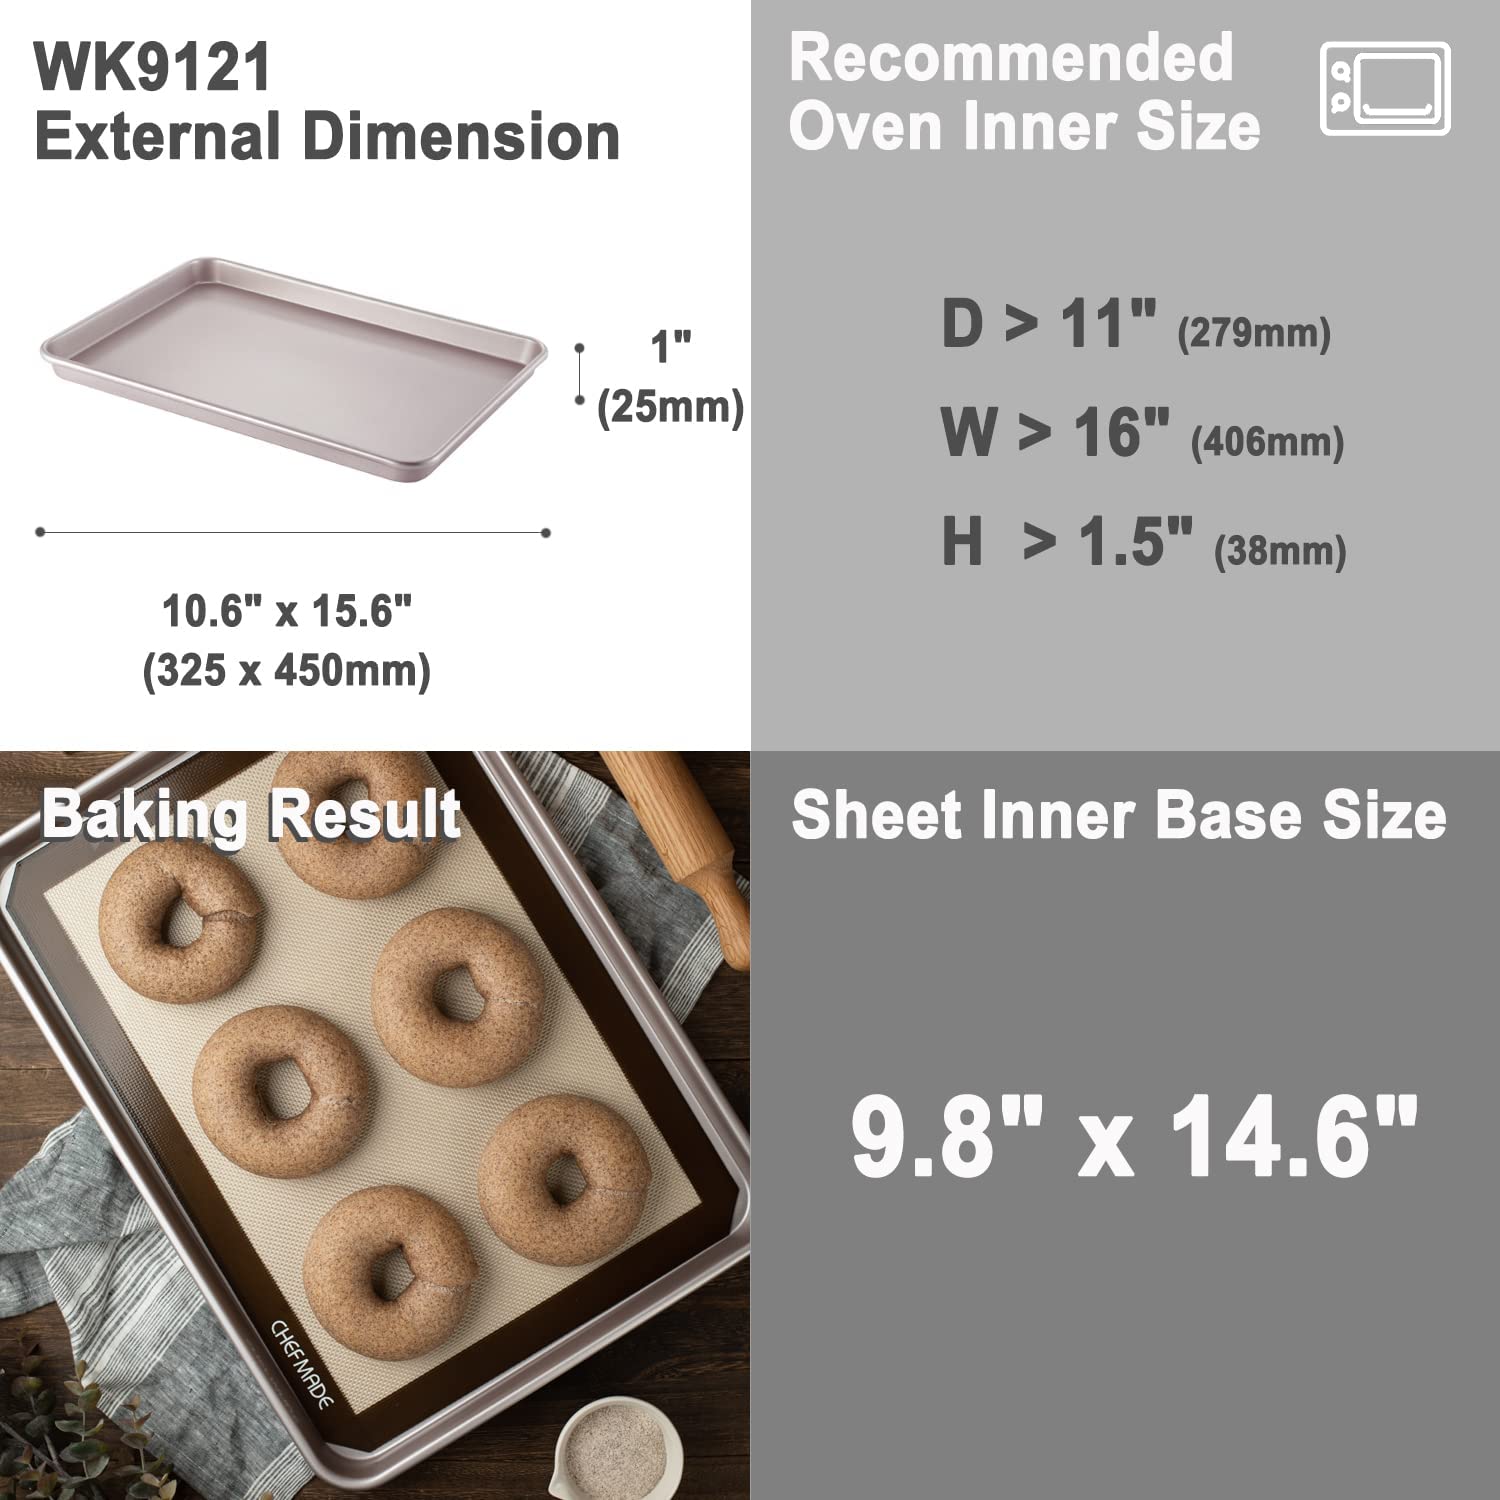 15x10 Inches Carbon Steel Nonstick Baking Sheet